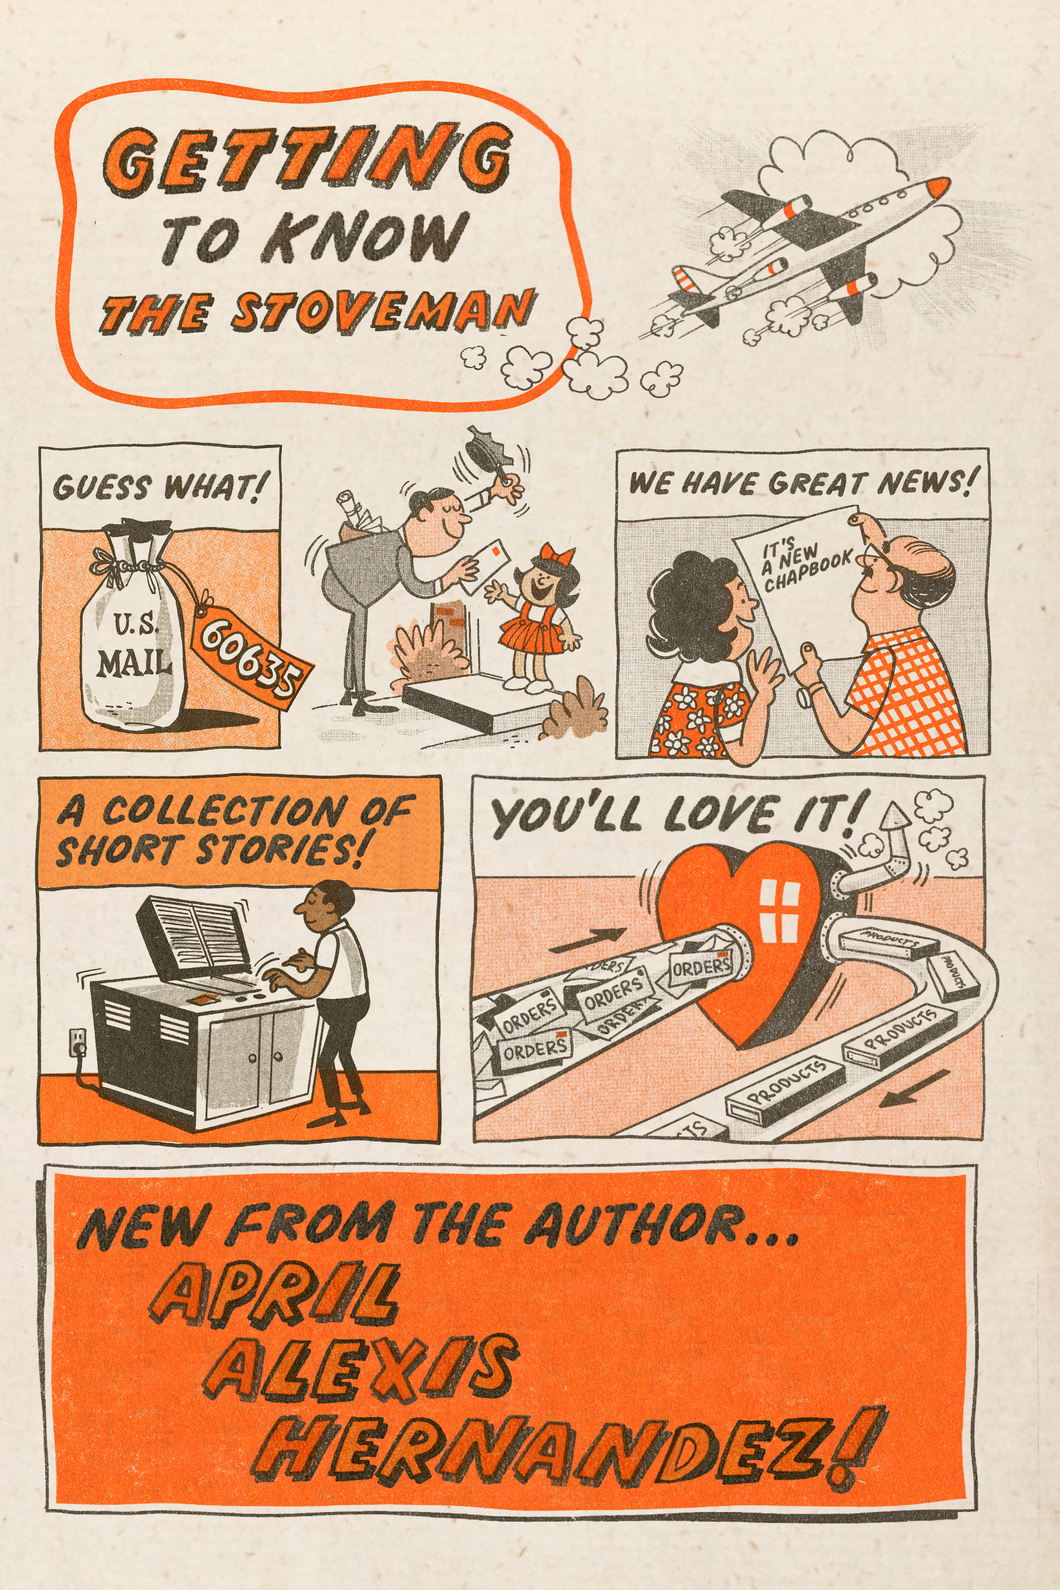 Getting to Know the Stoveman, by April Alexis Hernandez-Print Books-Bottlecap Press